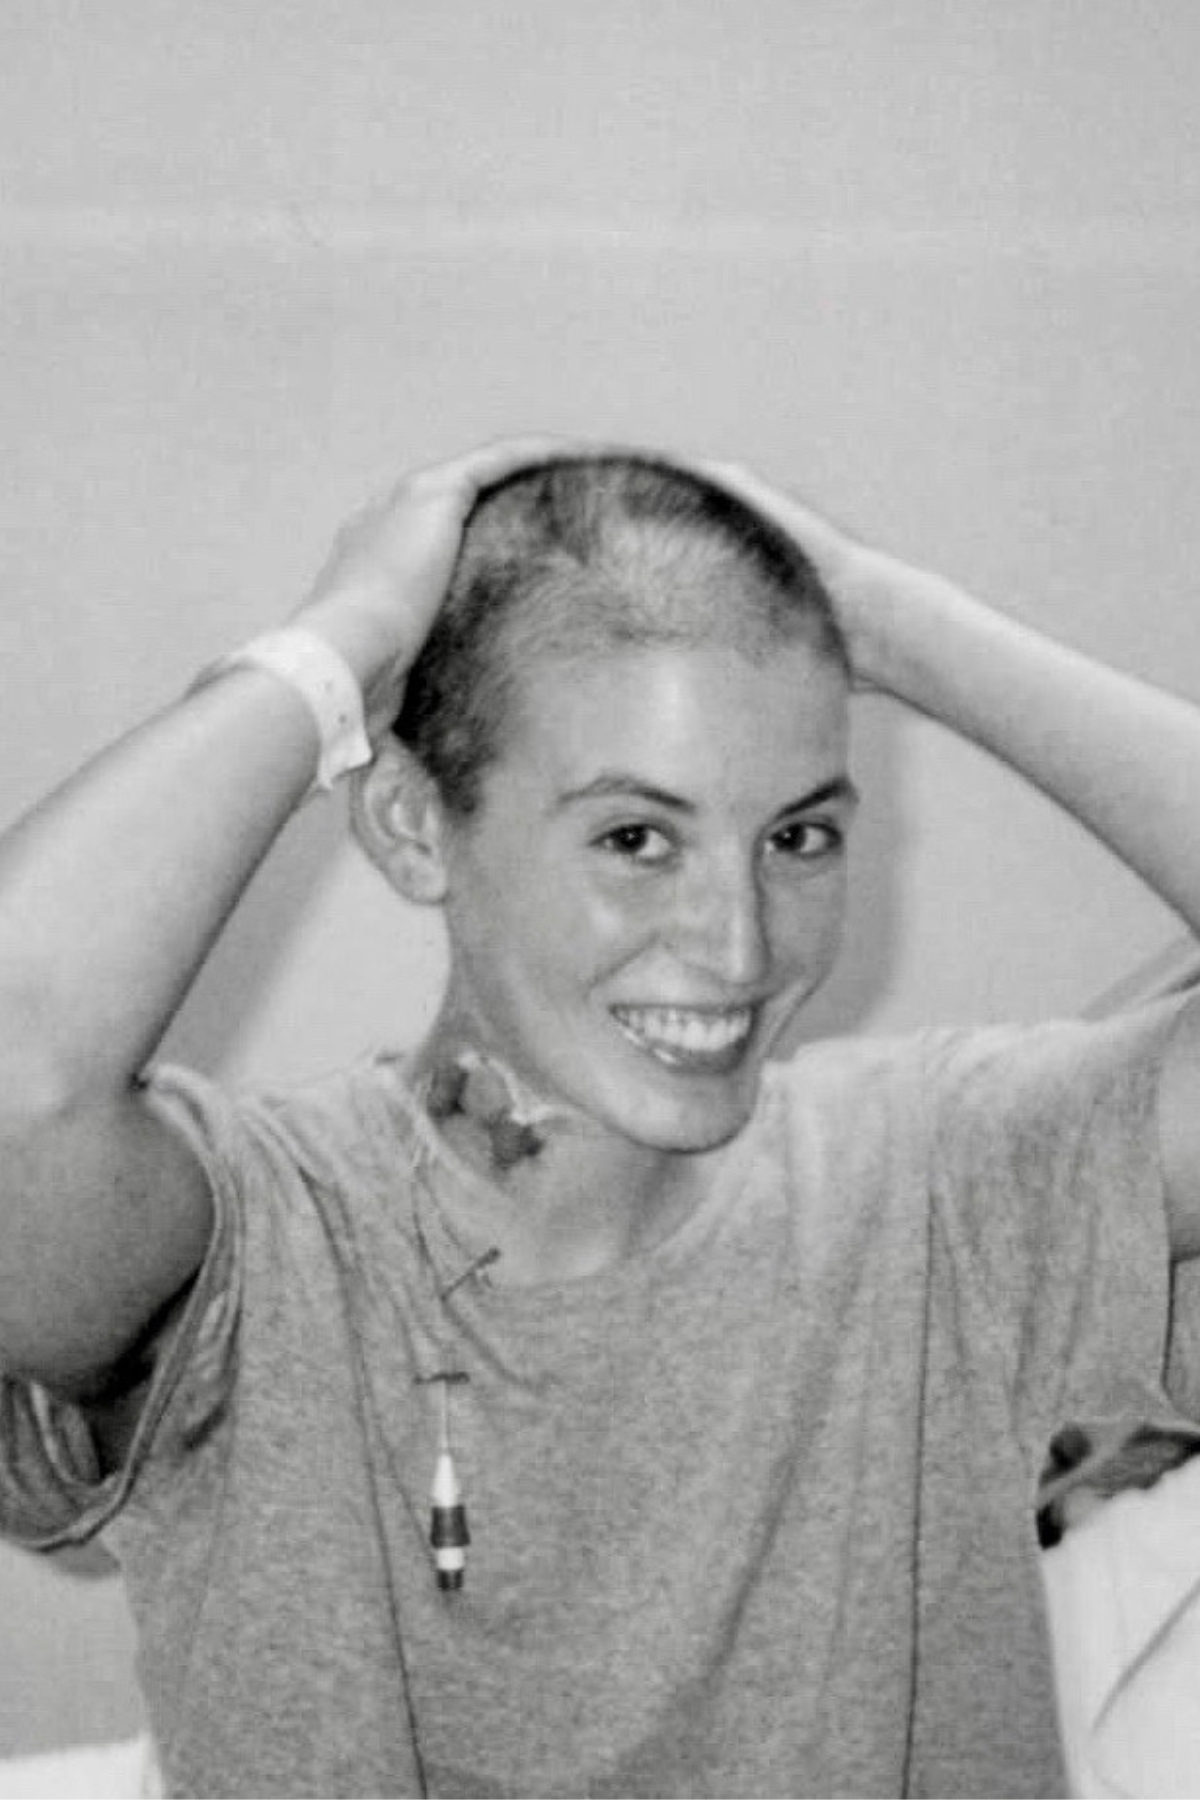 Beth with a shaved head because of cancer treatment